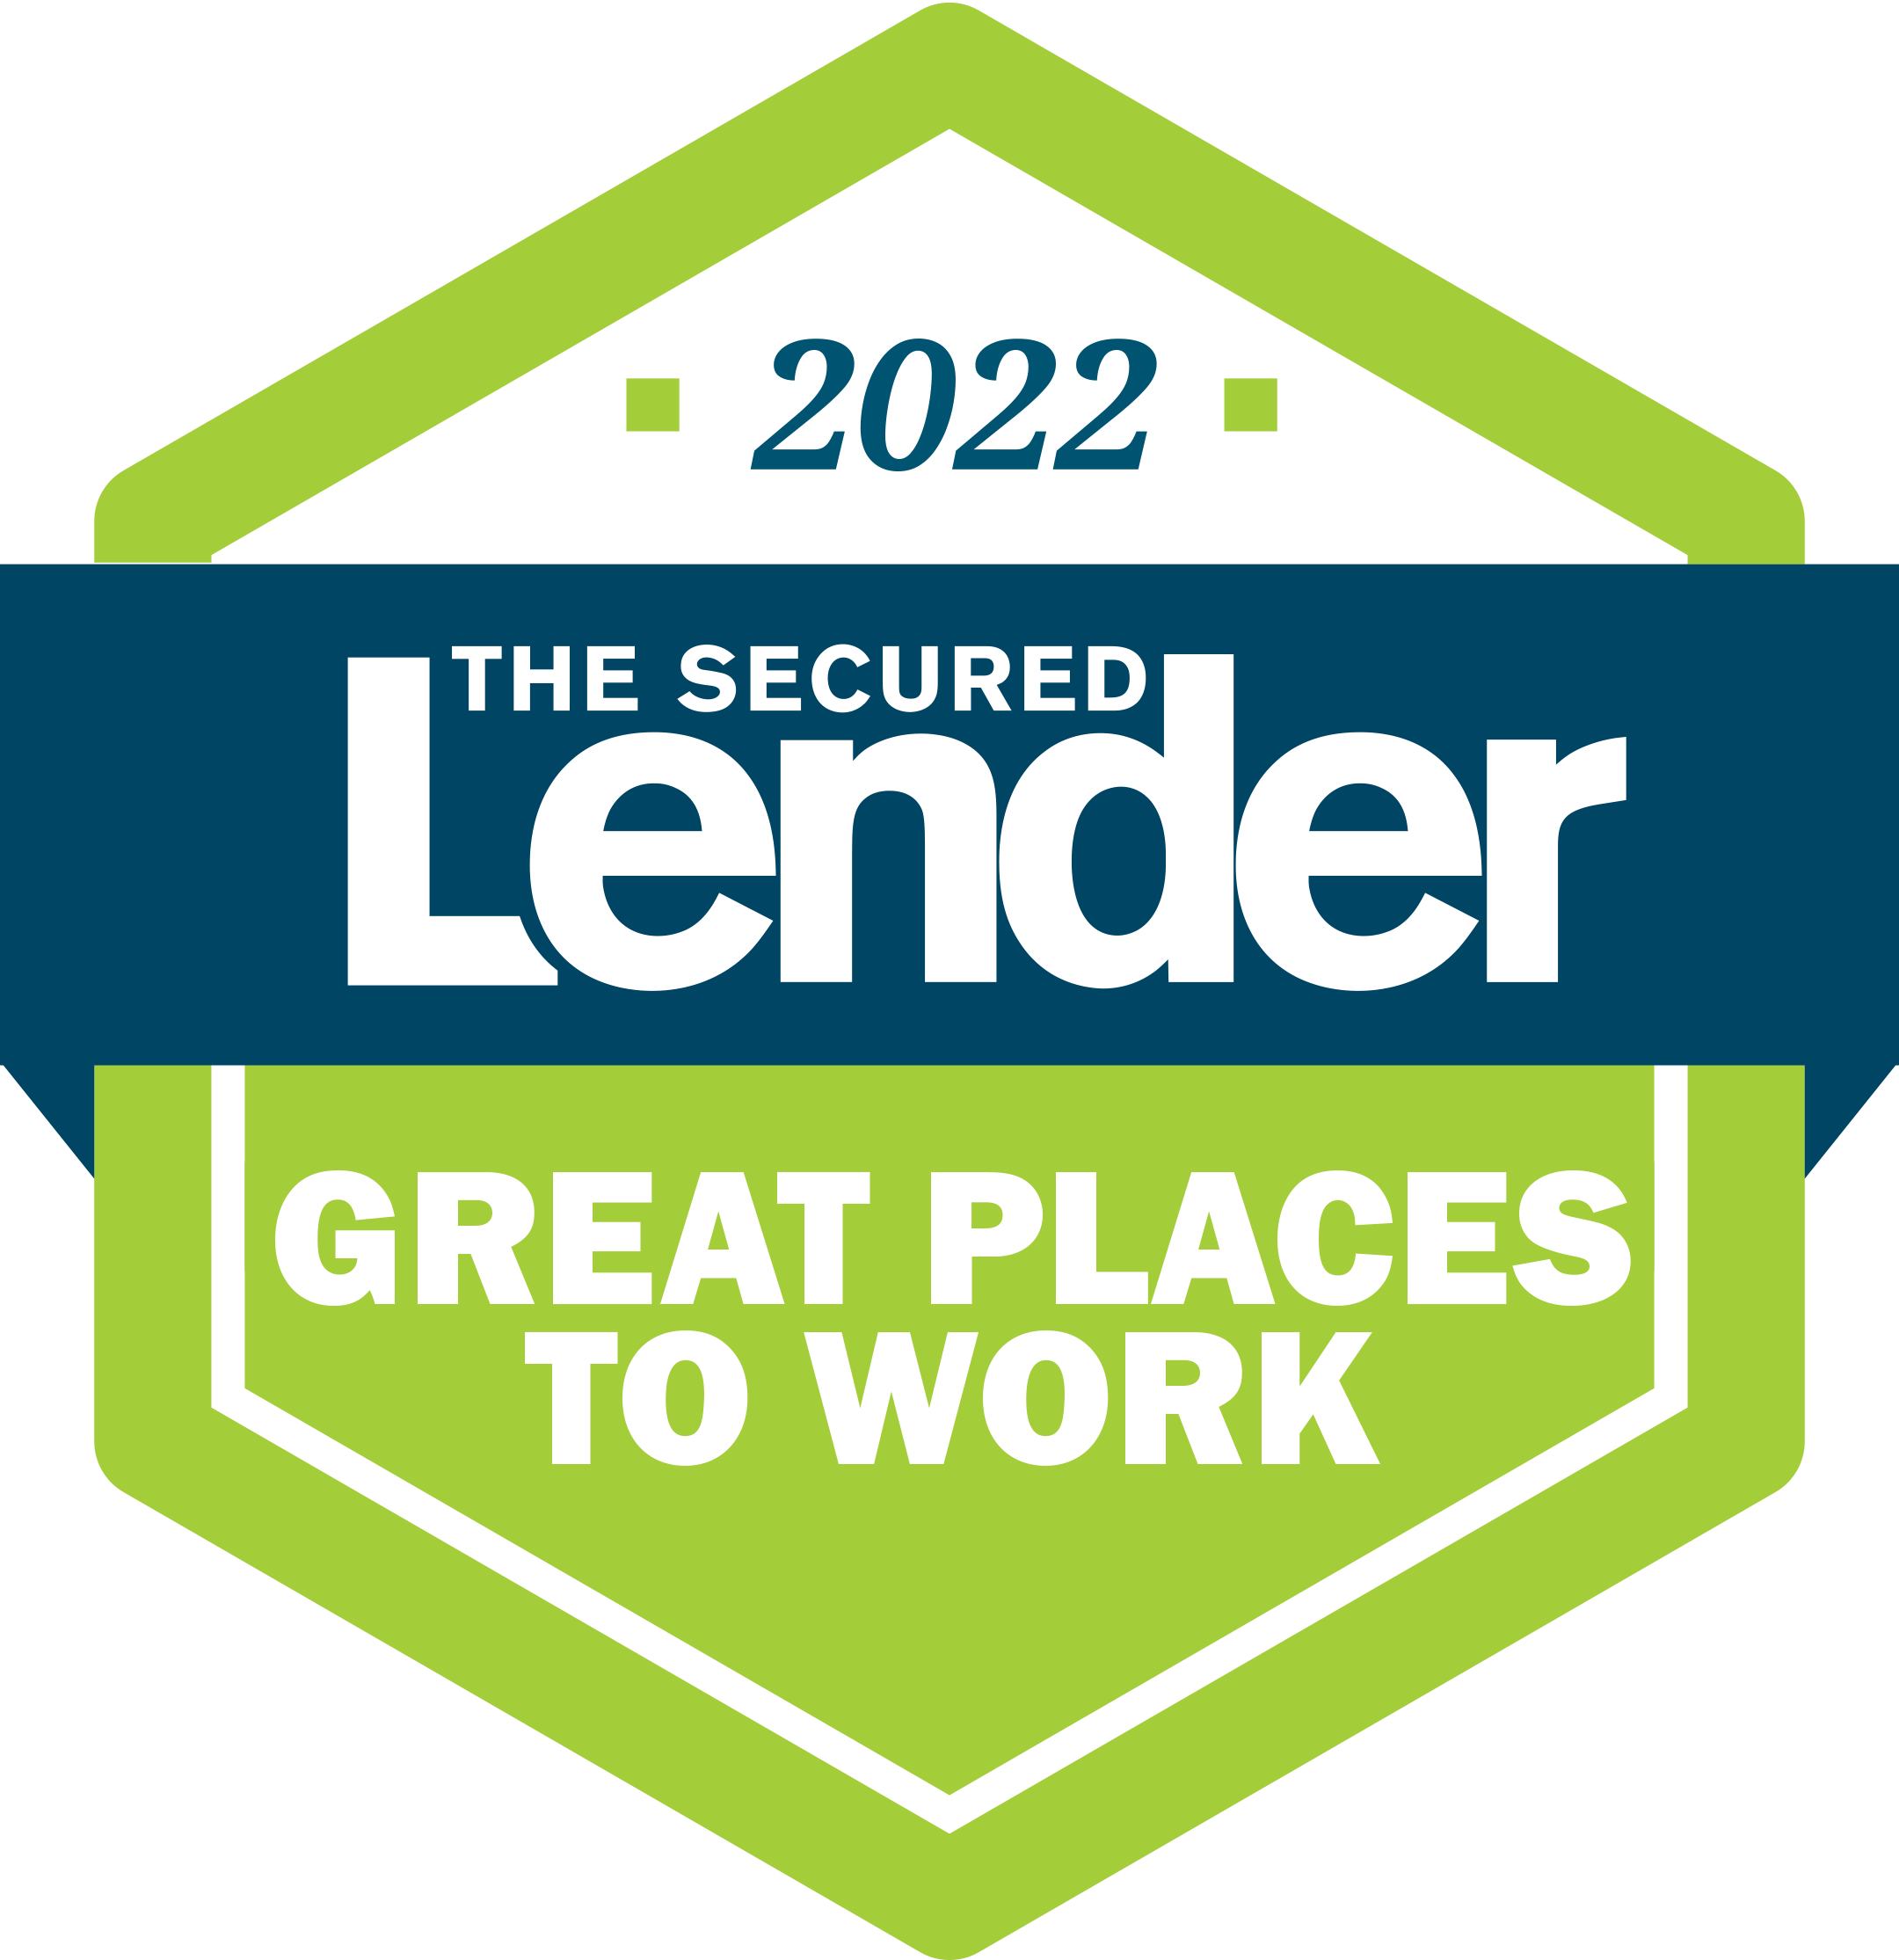 Secured Lender recognized CSC as one of the Great Places to Work in 2022